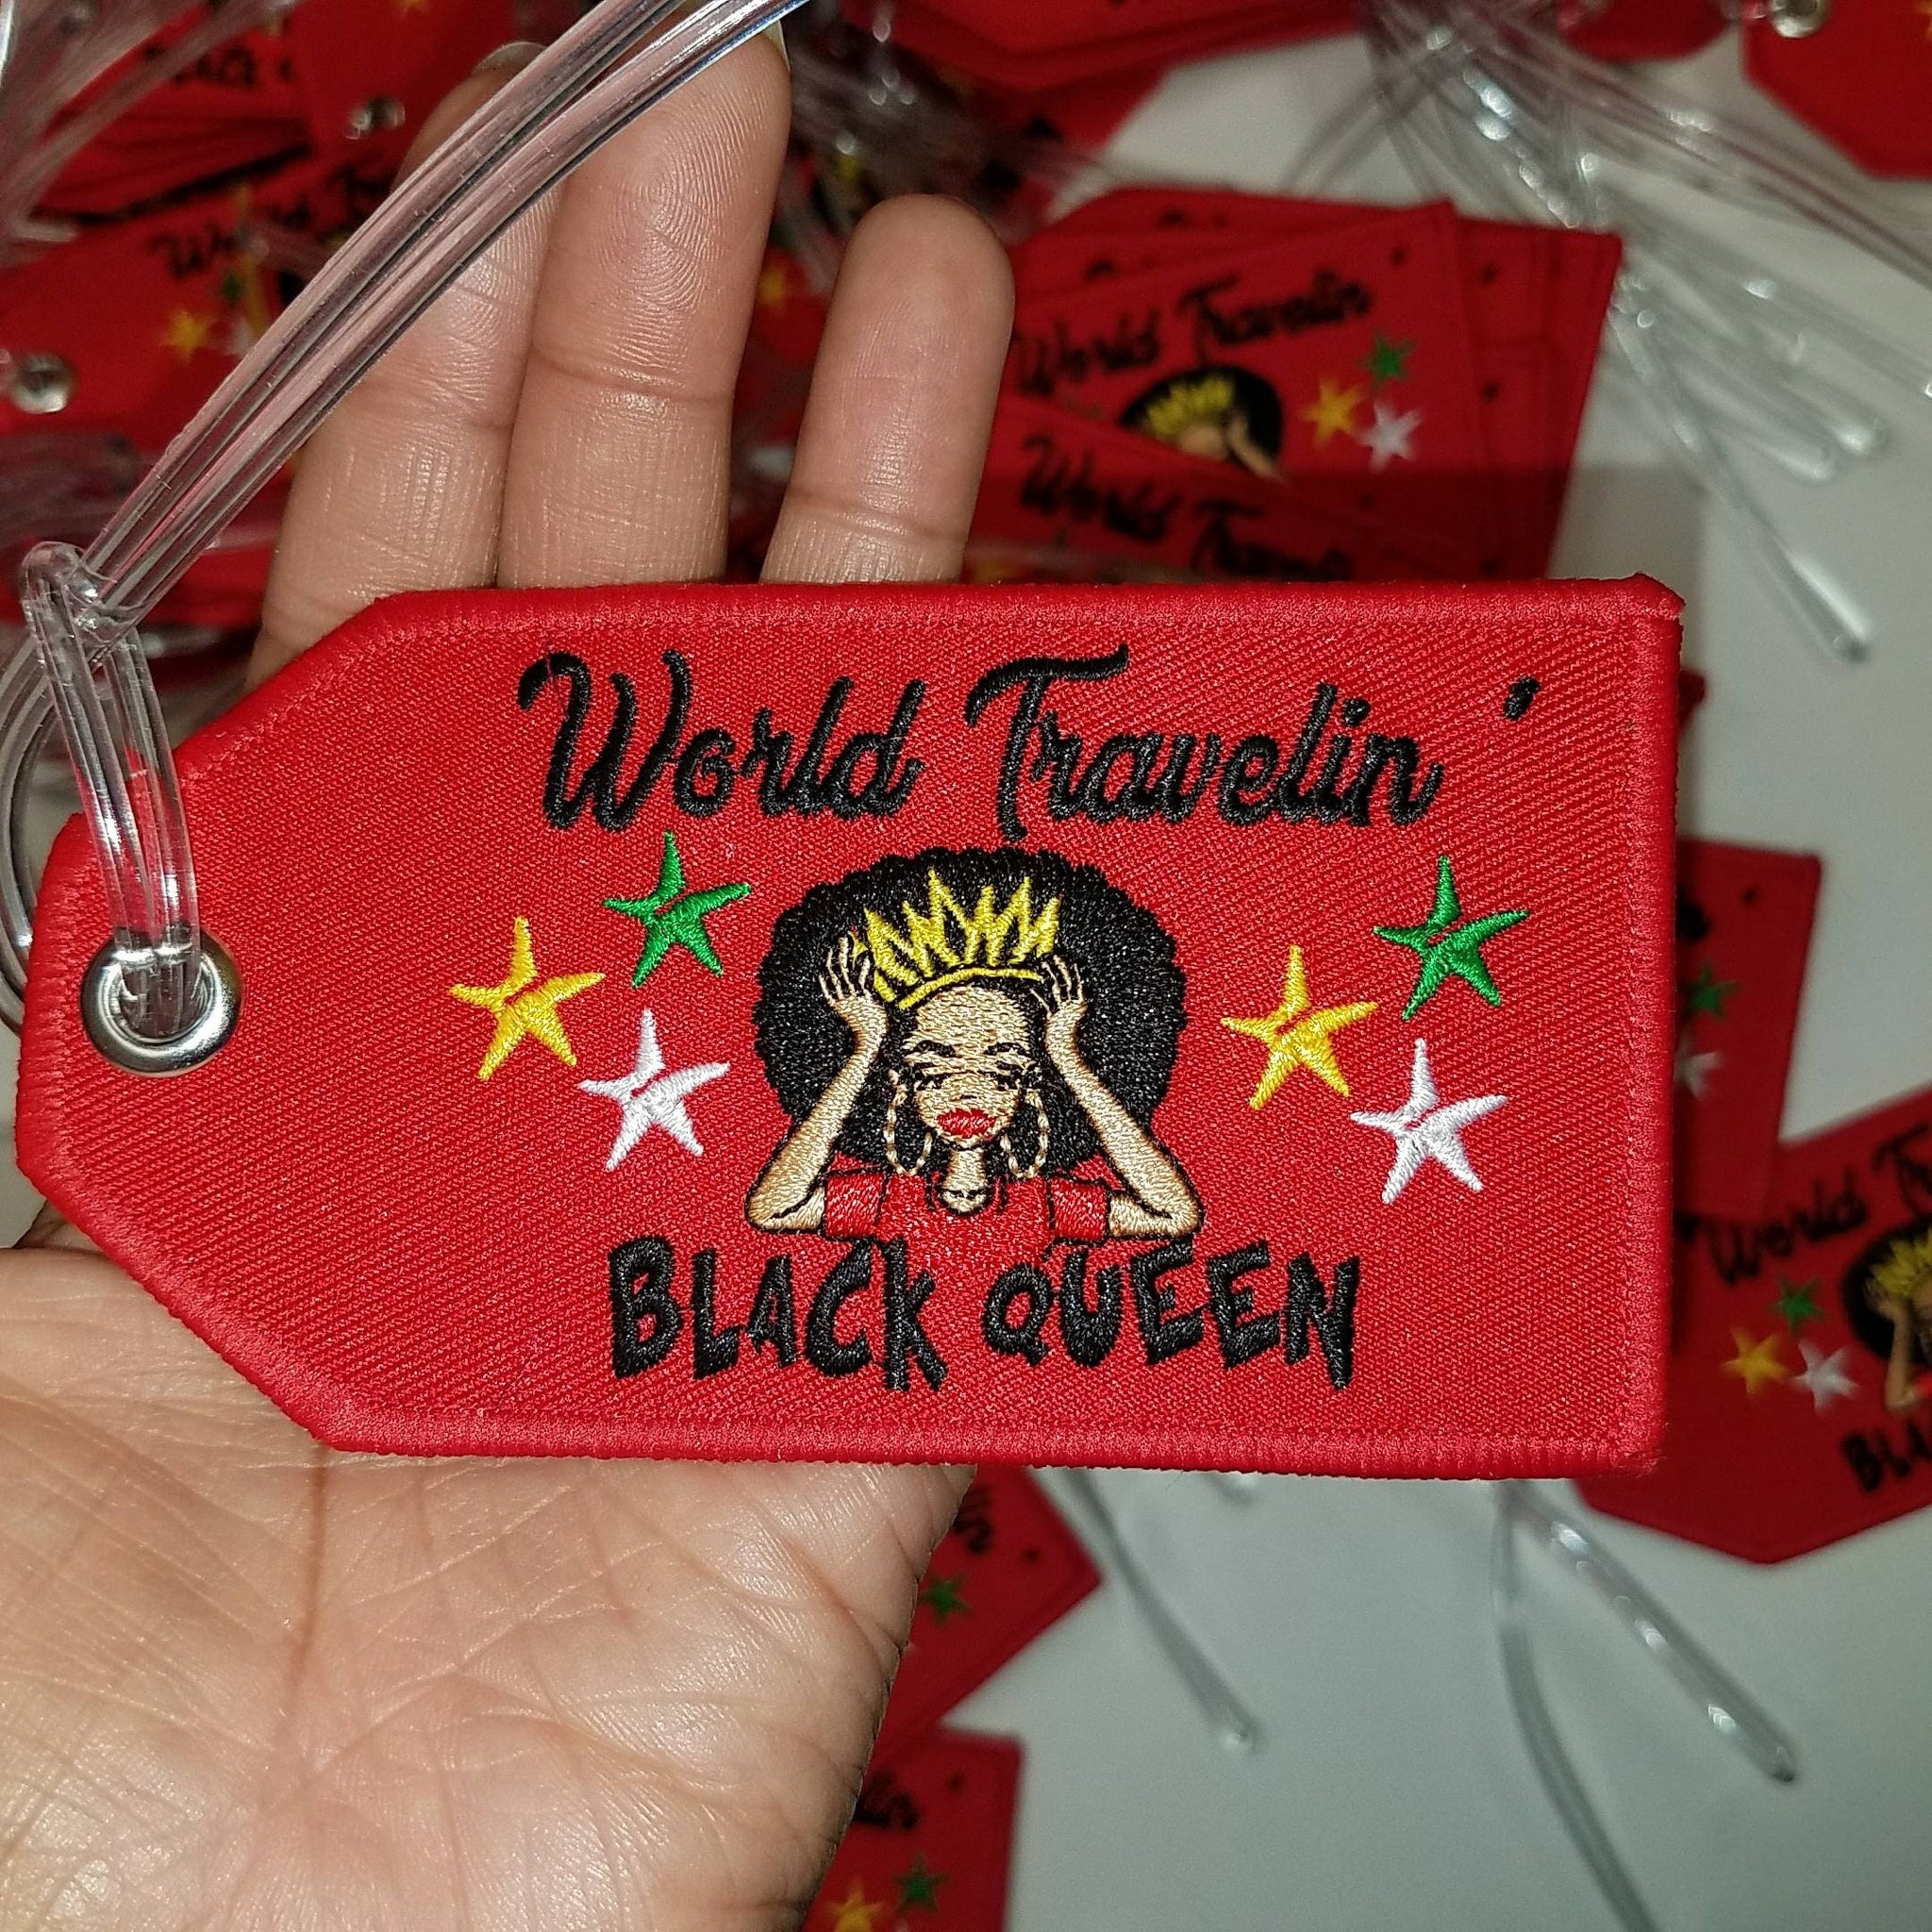 Afrocentric 'World Travelin' Black Queen, Luggage Tags, Bag Tags, Exclusive